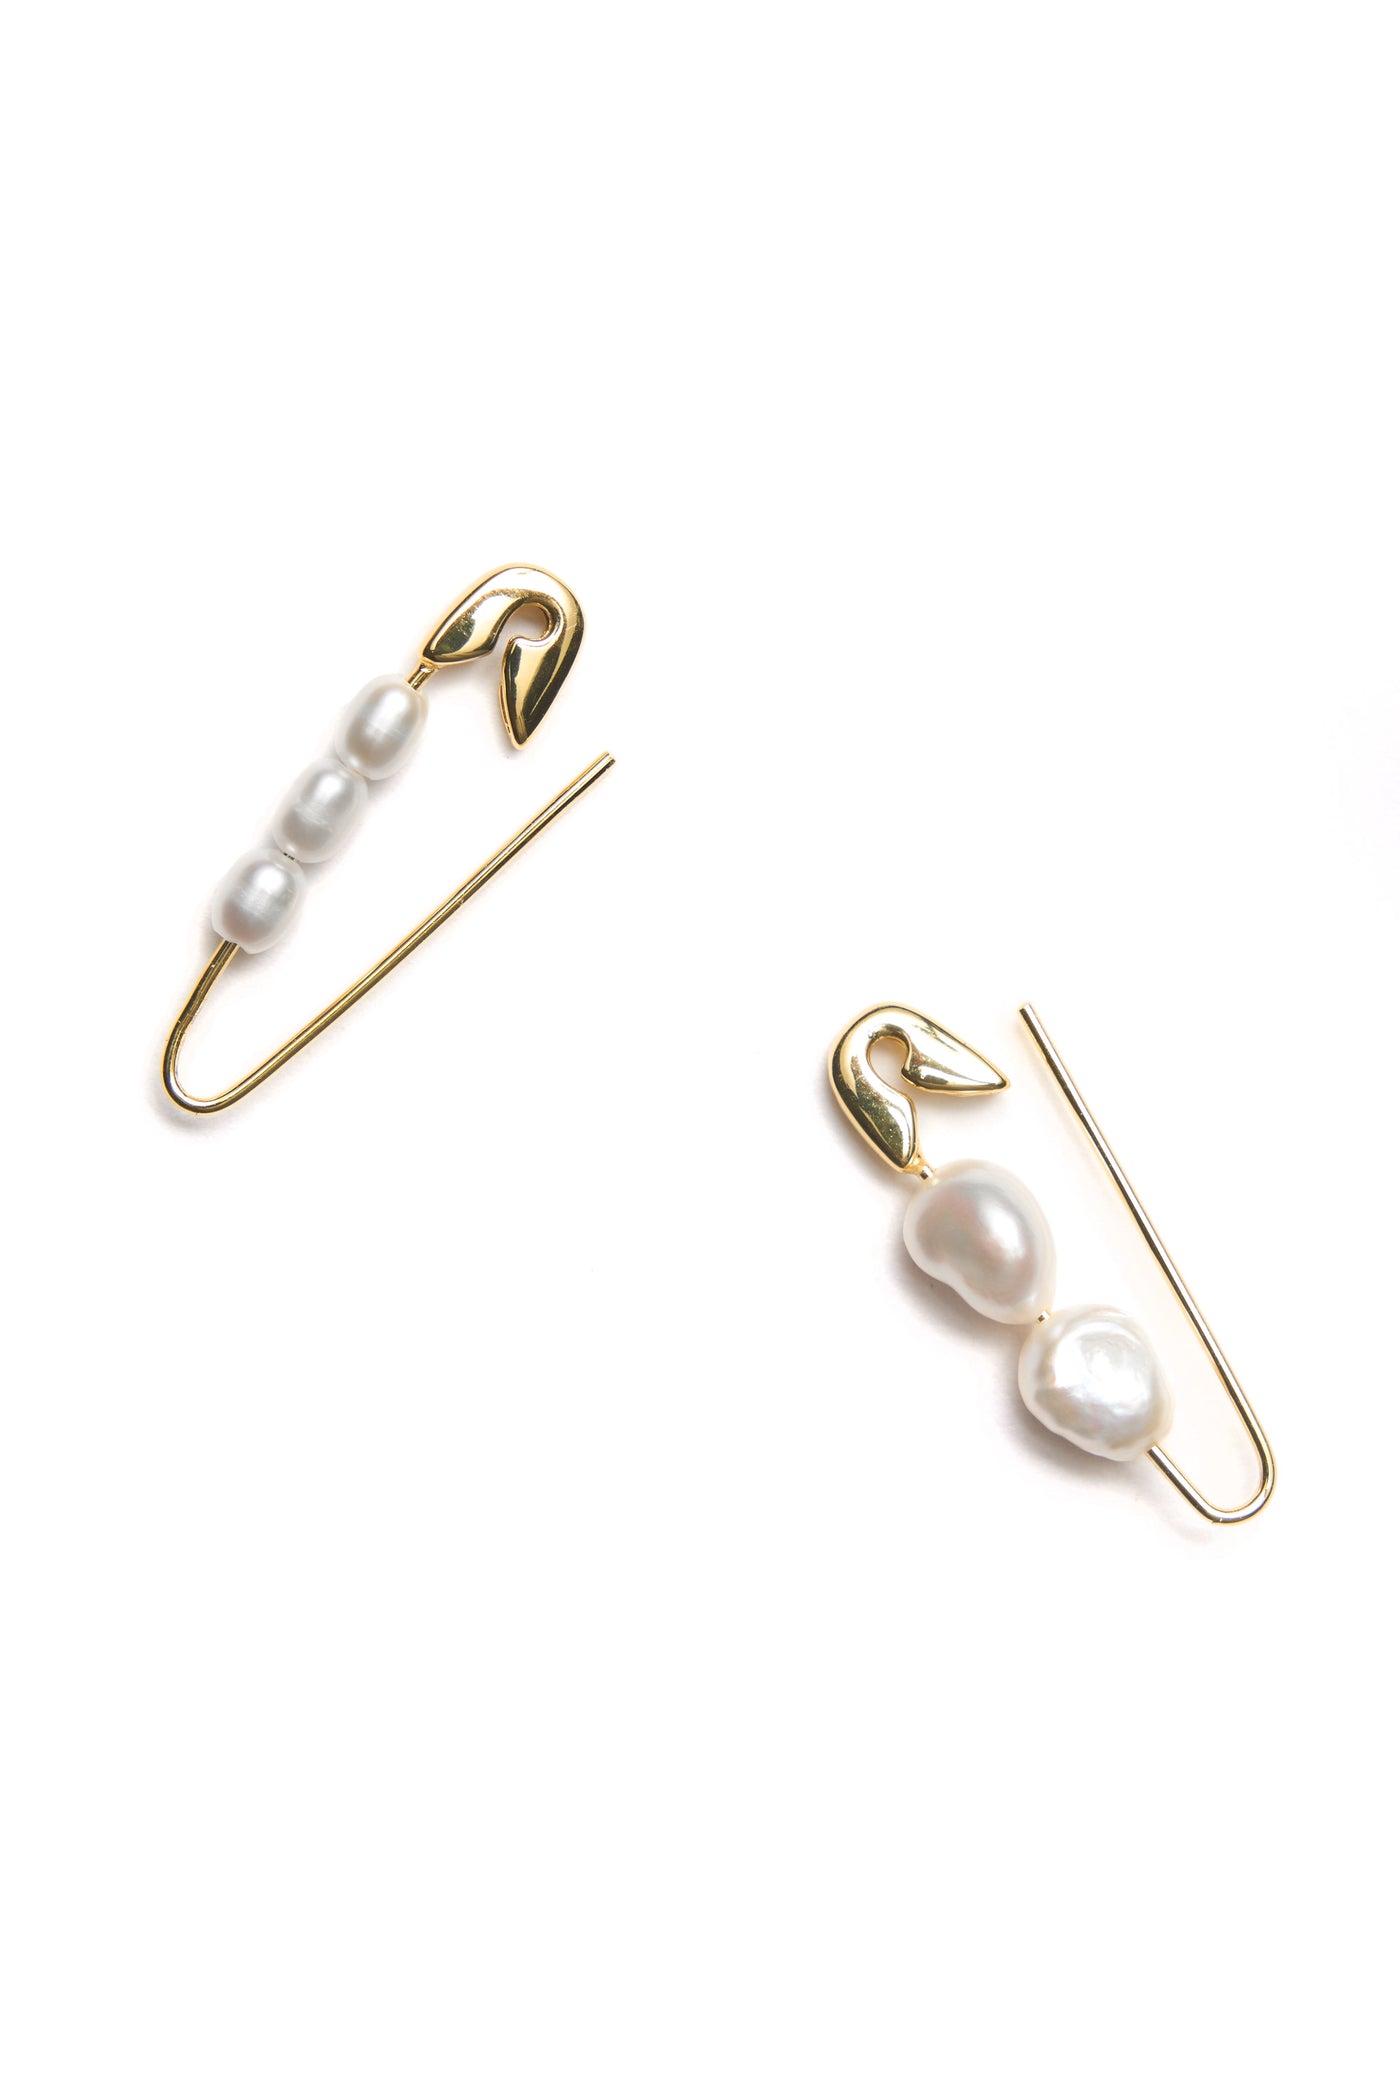 Bianca Mavrick Jewellery Safety Pin Earrings Gold Mismatched Pearls  Open